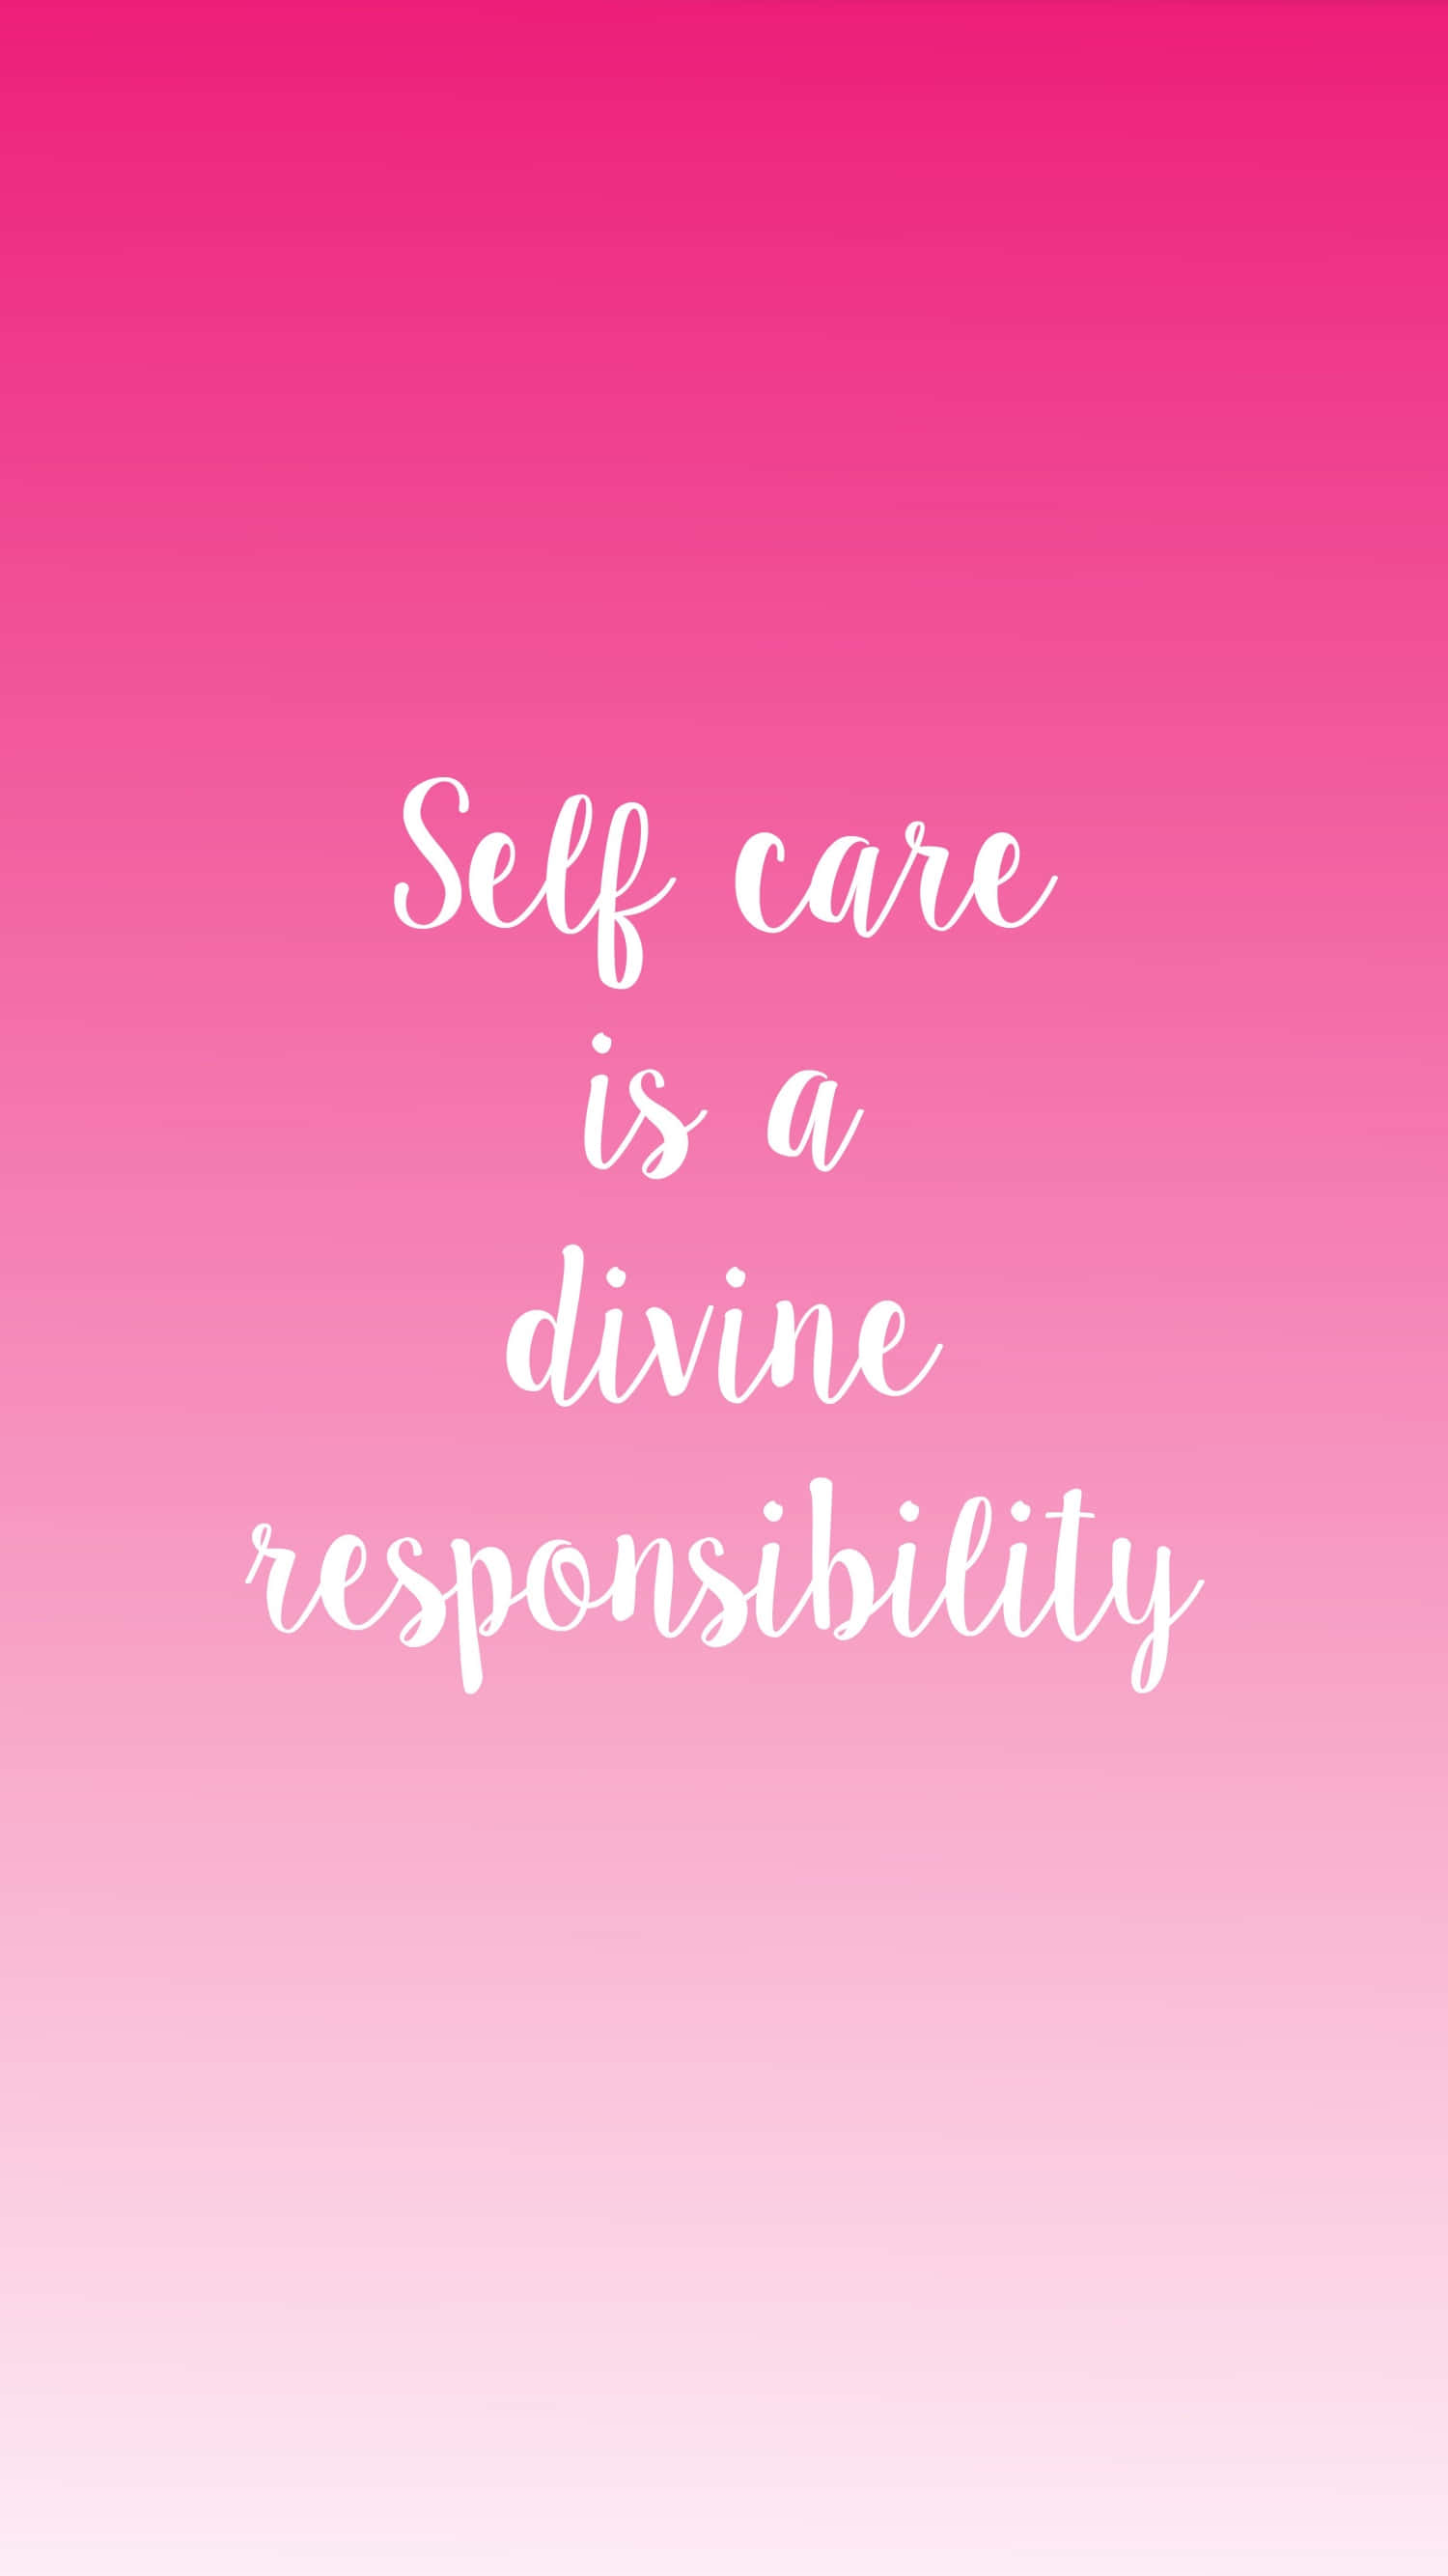 Taking time for self-care every day is essential for physical and mental wellbeing. Wallpaper